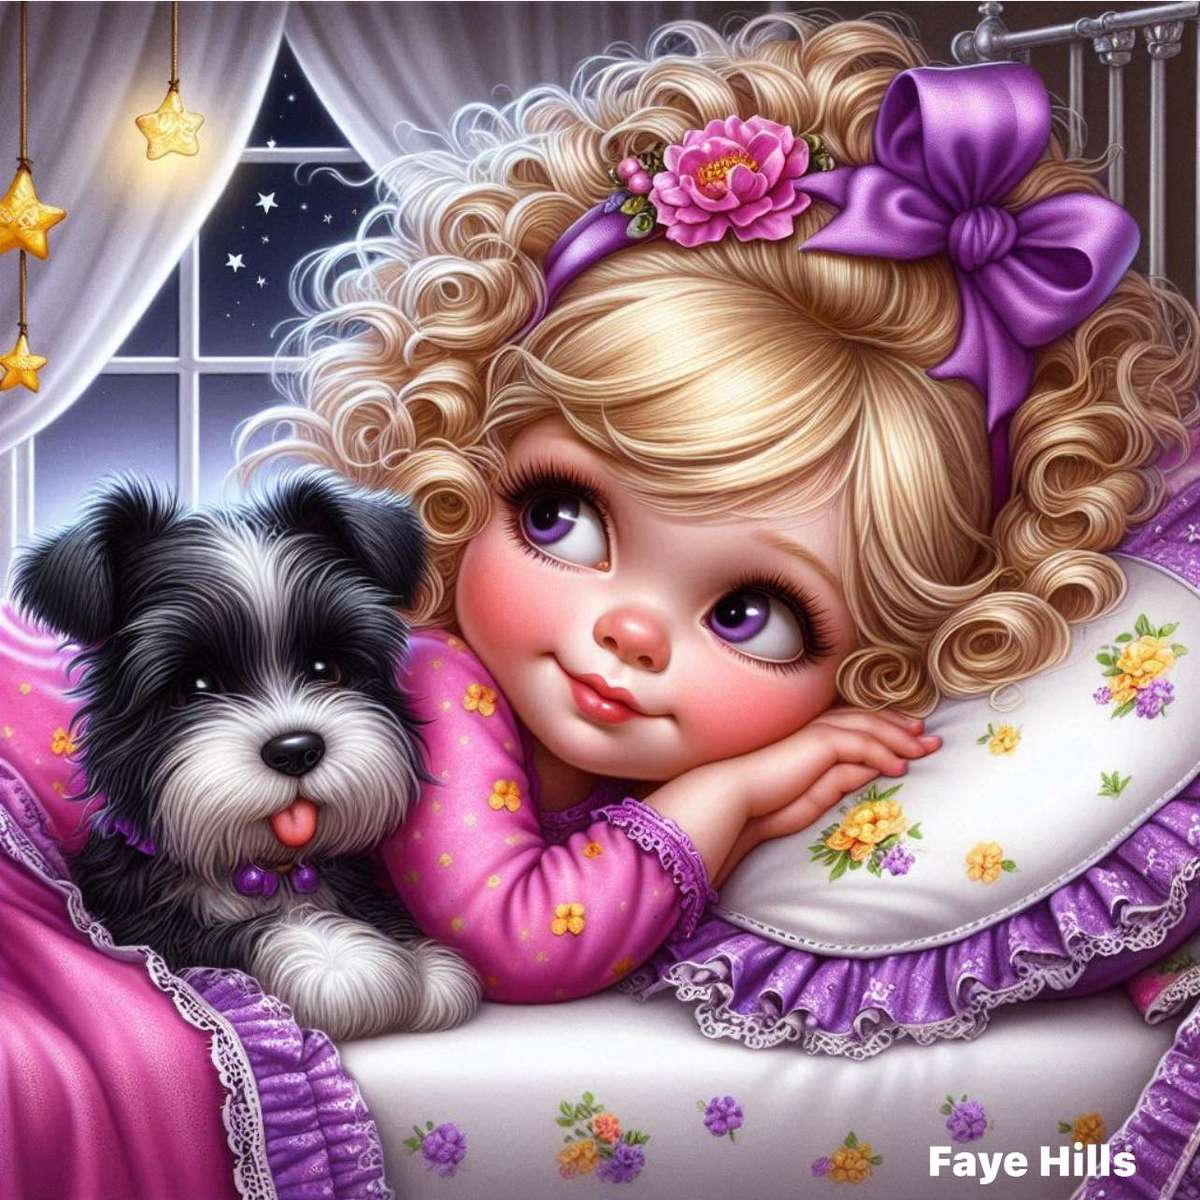 Girl with dog in bed jigsaw puzzle online